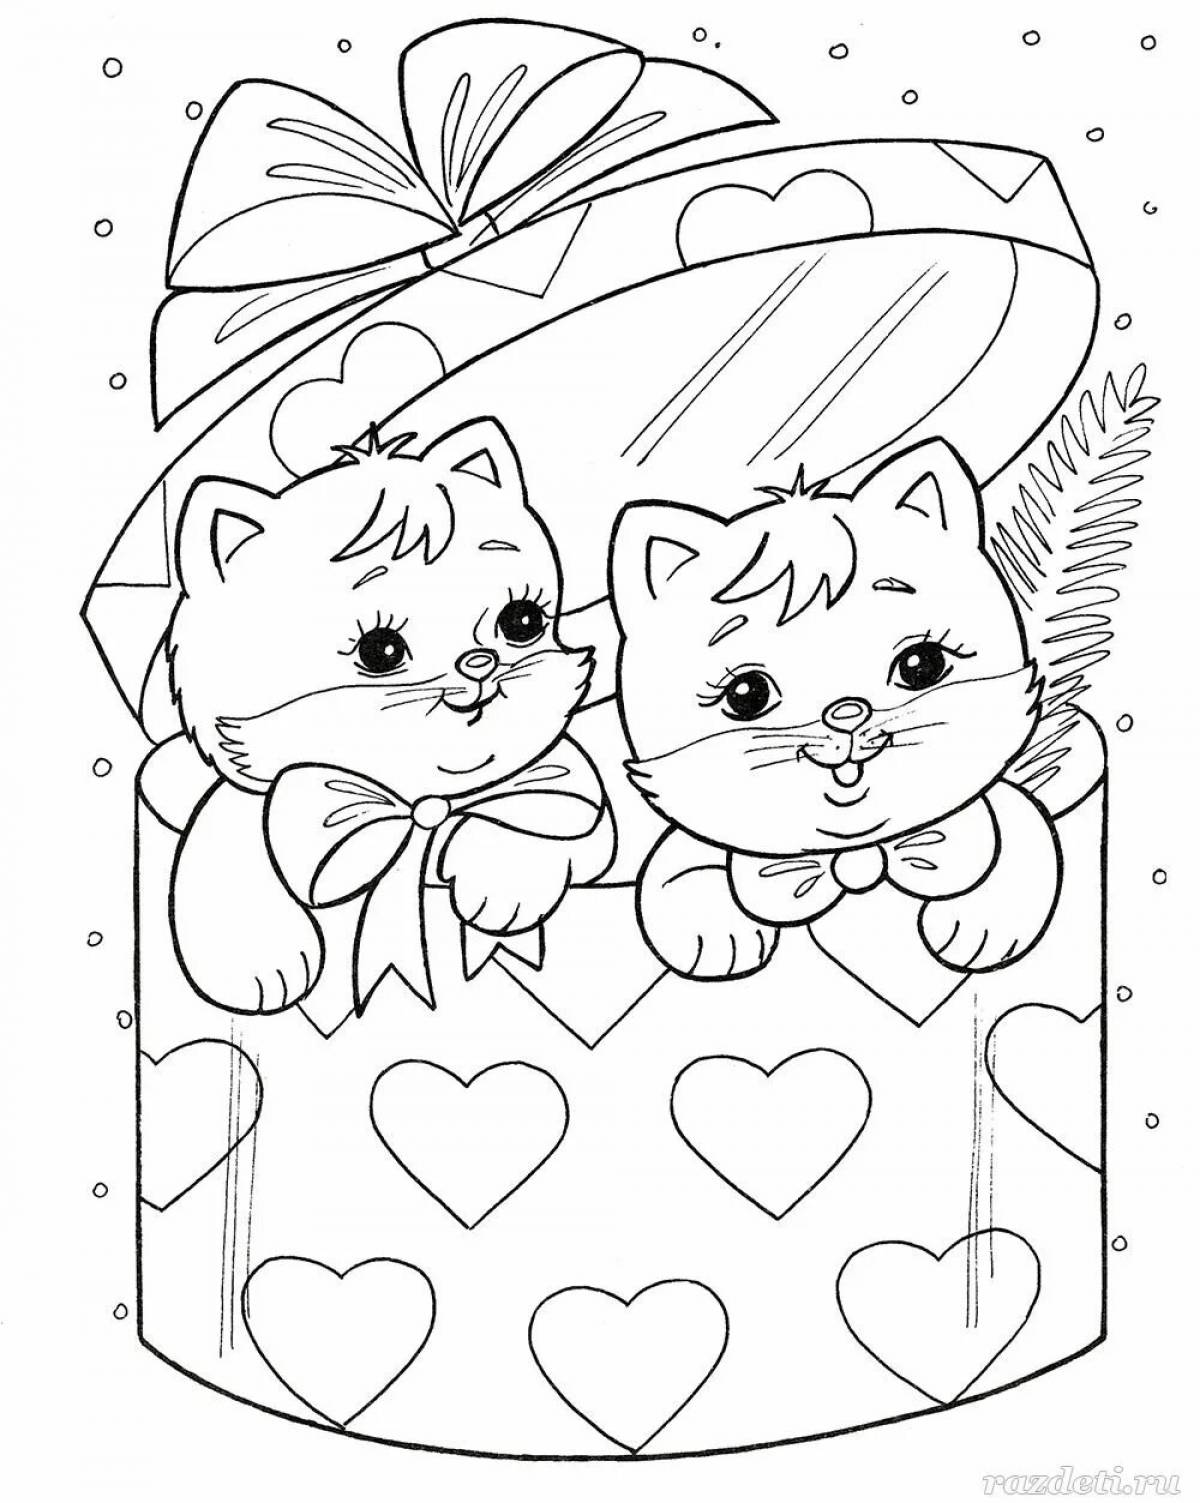 Zippy kittens coloring book for kids 6-7 years old